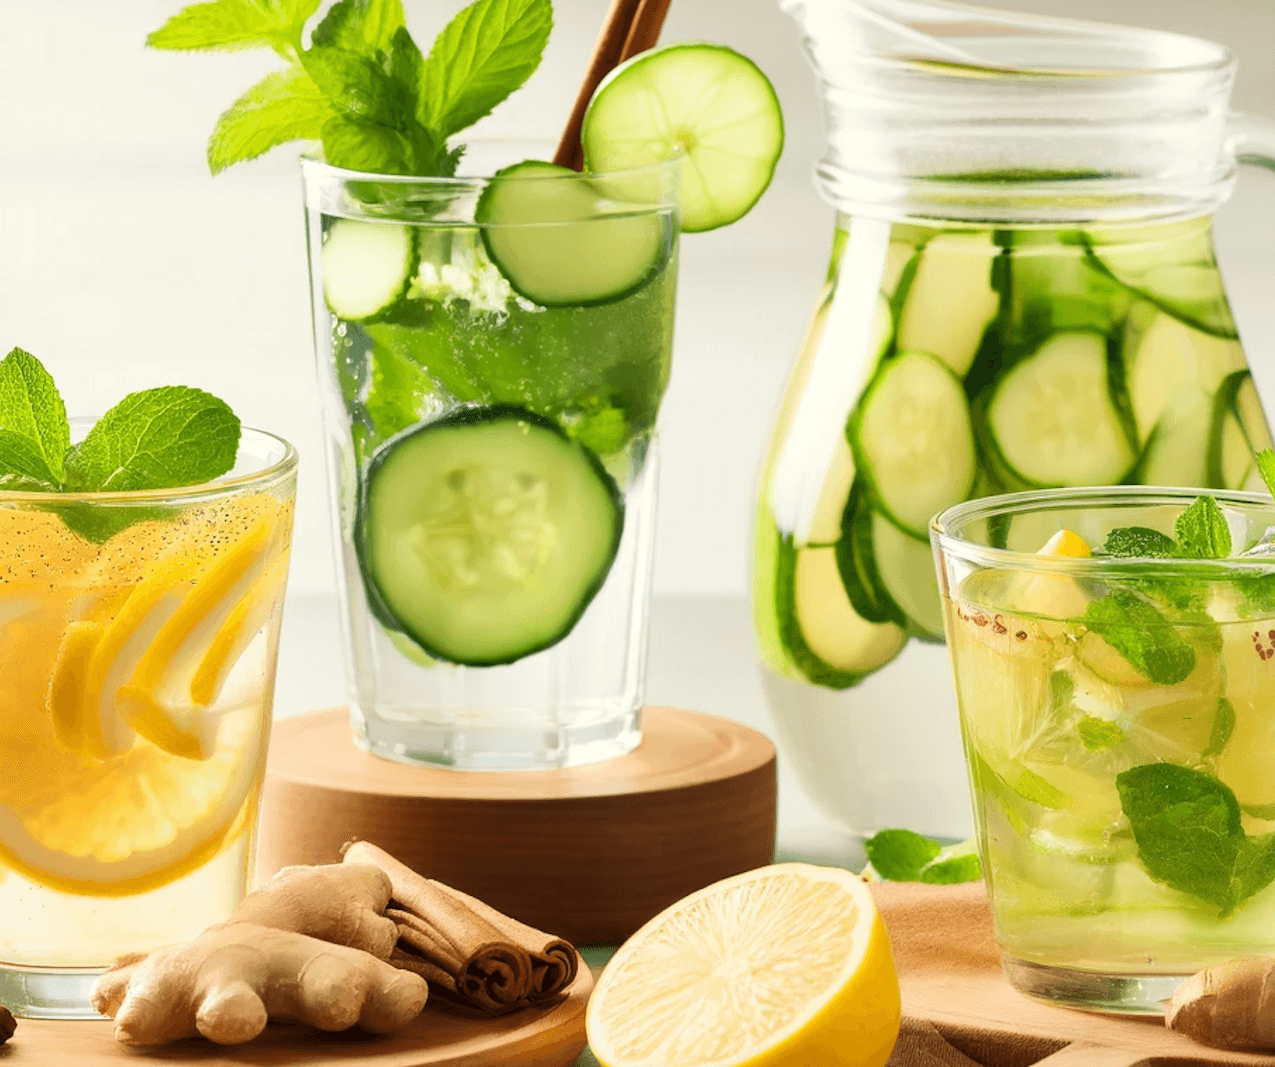 Three EASY Drinks to Detox & Strengthen Your Health